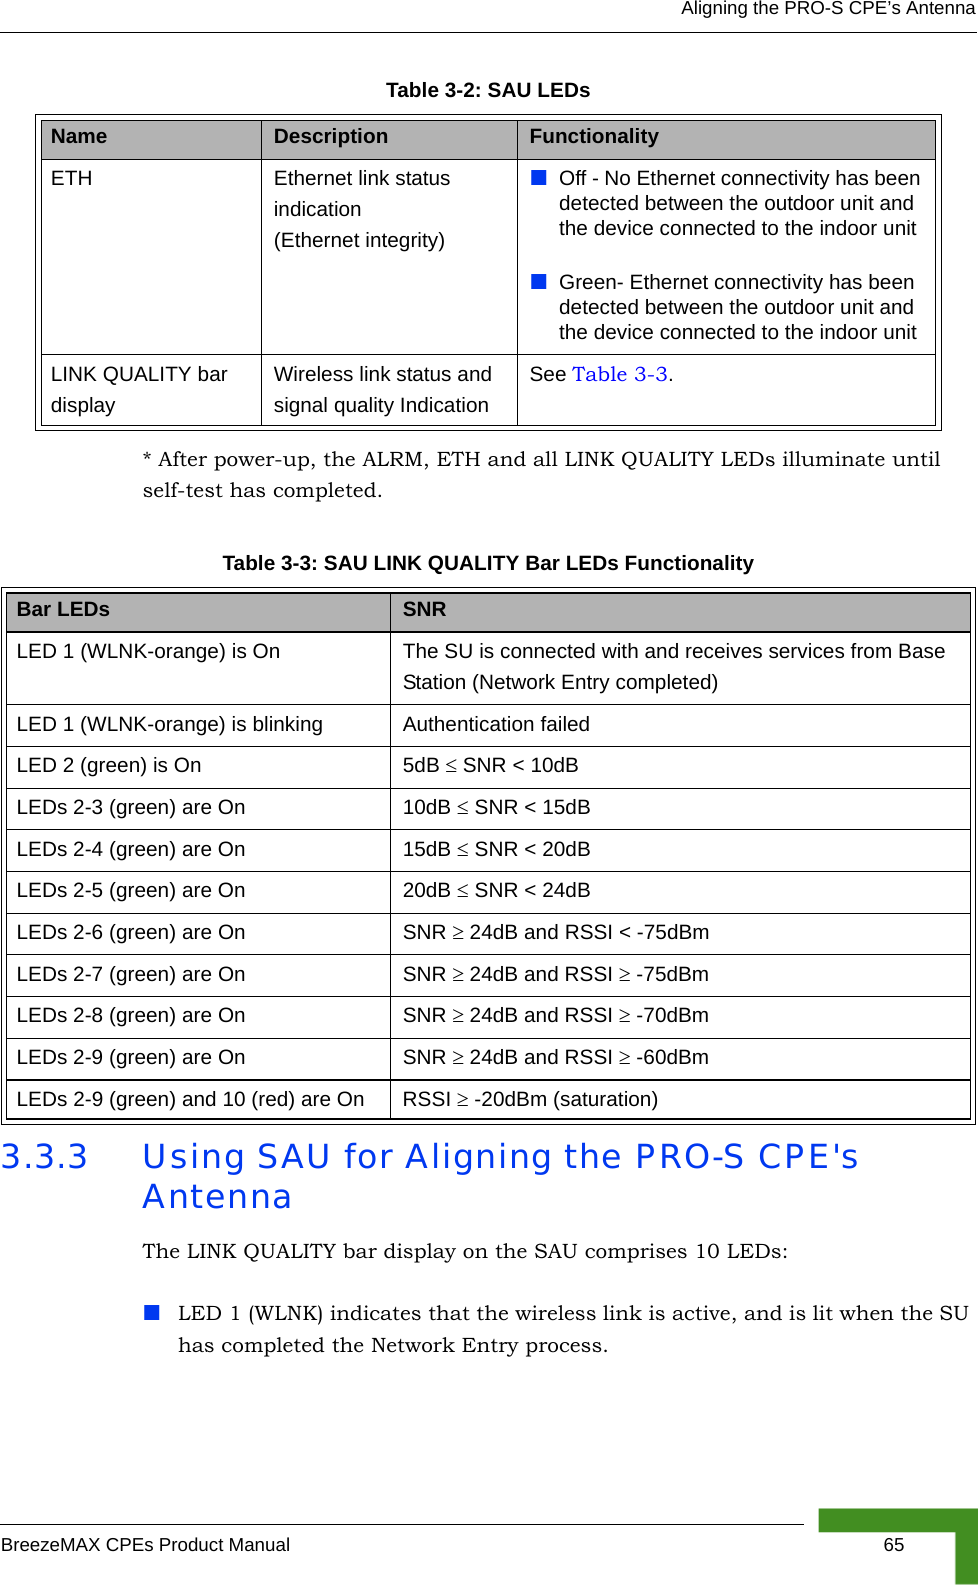 Aligning the PRO-S CPE’s AntennaBreezeMAX CPEs Product Manual 65* After power-up, the ALRM, ETH and all LINK QUALITY LEDs illuminate until self-test has completed.3.3.3 Using SAU for Aligning the PRO-S CPE&apos;s AntennaThe LINK QUALITY bar display on the SAU comprises 10 LEDs:LED 1 (WLNK) indicates that the wireless link is active, and is lit when the SU has completed the Network Entry process. ETH Ethernet link status indication(Ethernet integrity)Off - No Ethernet connectivity has been detected between the outdoor unit and the device connected to the indoor unitGreen- Ethernet connectivity has been detected between the outdoor unit and the device connected to the indoor unit LINK QUALITY bar display Wireless link status and signal quality IndicationSee Table 3-3.Table 3-3: SAU LINK QUALITY Bar LEDs FunctionalityBar LEDs SNRLED 1 (WLNK-orange) is On The SU is connected with and receives services from Base Station (Network Entry completed)LED 1 (WLNK-orange) is blinking Authentication failedLED 2 (green) is On 5dB ≤ SNR &lt; 10dBLEDs 2-3 (green) are On 10dB ≤ SNR &lt; 15dBLEDs 2-4 (green) are On 15dB ≤ SNR &lt; 20dBLEDs 2-5 (green) are On 20dB ≤ SNR &lt; 24dBLEDs 2-6 (green) are On SNR ≥ 24dB and RSSI &lt; -75dBmLEDs 2-7 (green) are On SNR ≥ 24dB and RSSI ≥ -75dBmLEDs 2-8 (green) are On SNR ≥ 24dB and RSSI ≥ -70dBm LEDs 2-9 (green) are On SNR ≥ 24dB and RSSI ≥ -60dBm LEDs 2-9 (green) and 10 (red) are On RSSI ≥ -20dBm (saturation)Table 3-2: SAU LEDsName Description Functionality